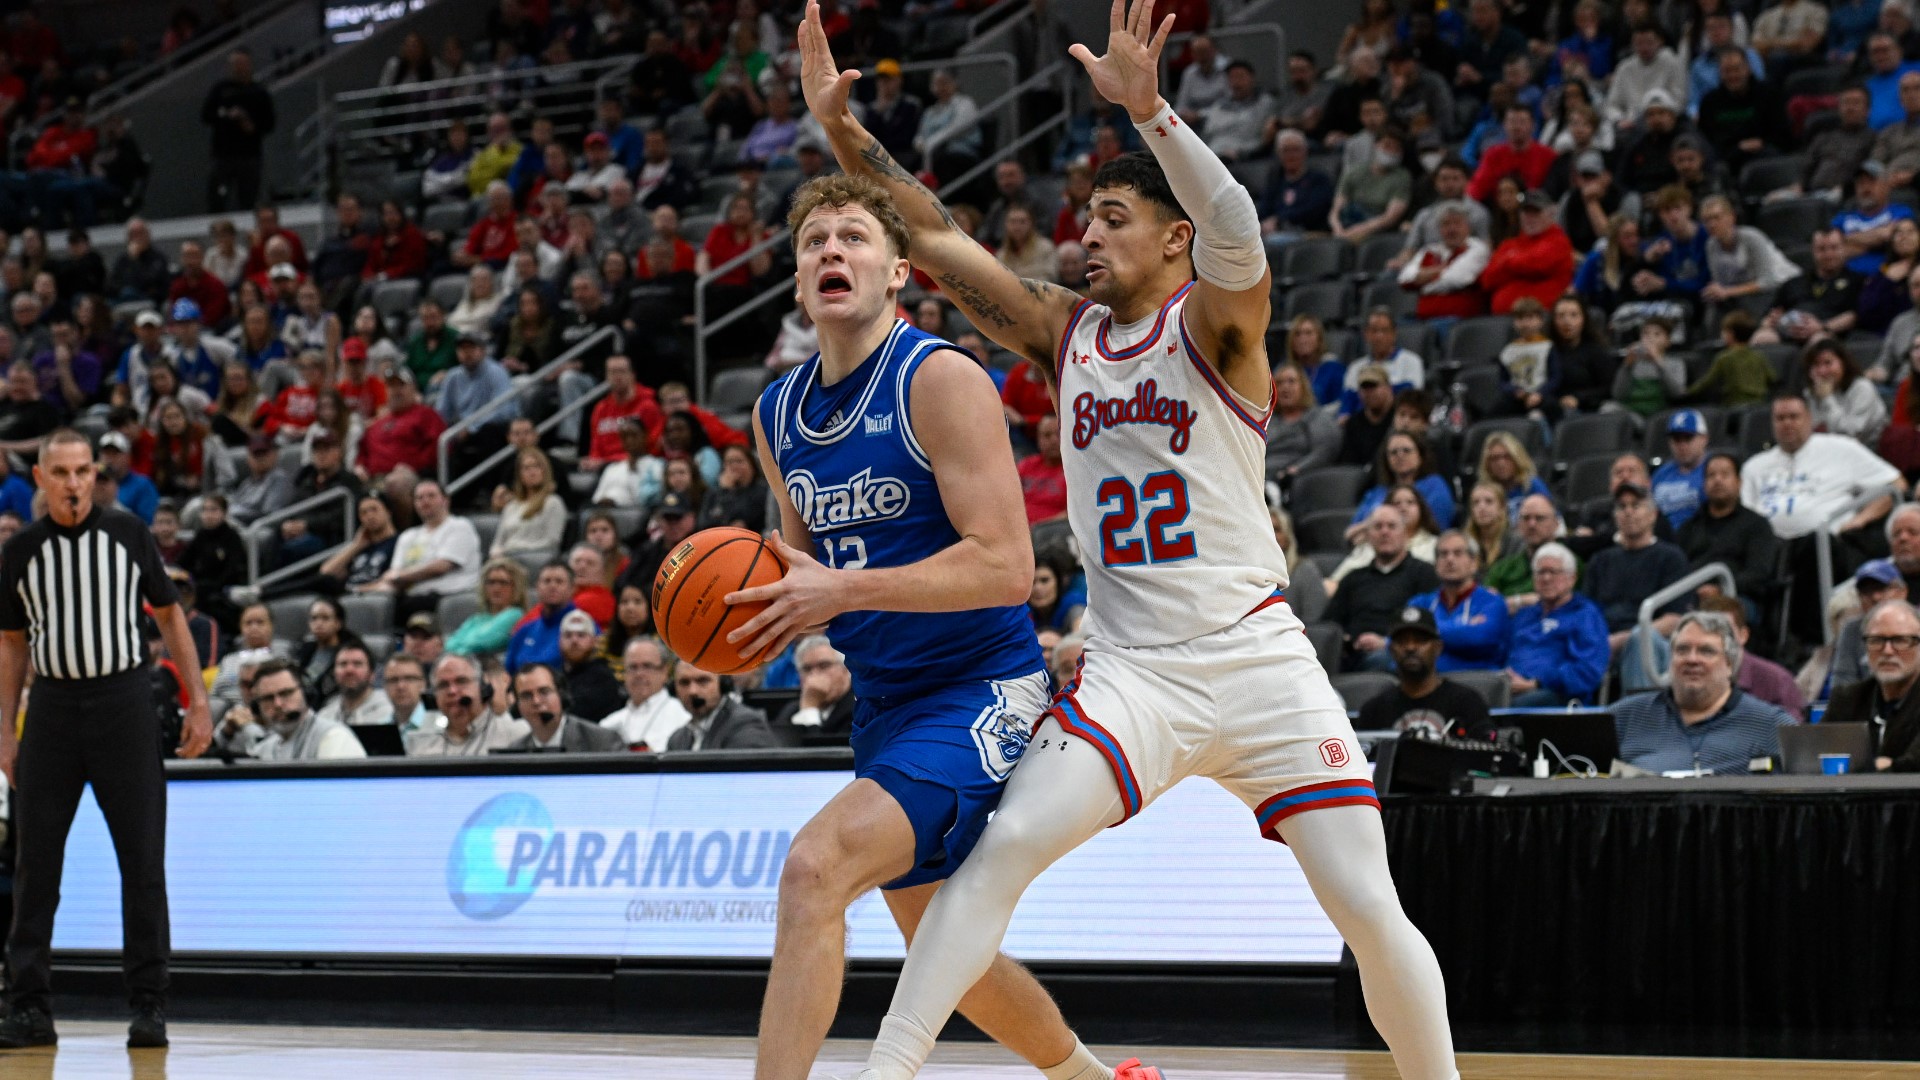 Tucker DeVries scored 22 points and second-seeded Drake raced to its sixth NCAA Tournament berth with a 77-51 romp past top-seeded Bradley on Sunday.